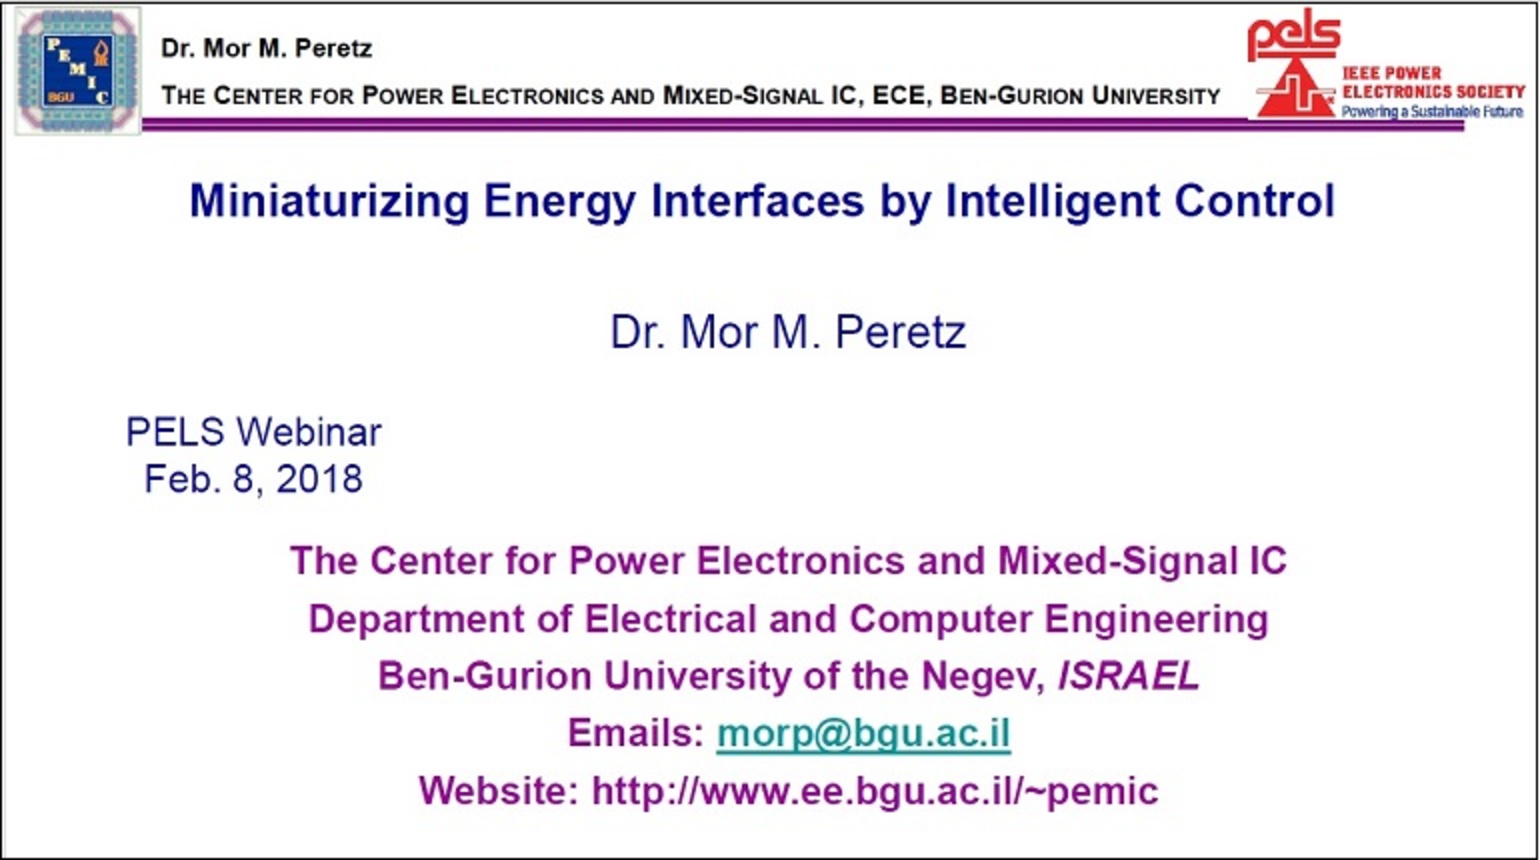 Miniaturizing Energy Interfaces by Intelligent Control Video